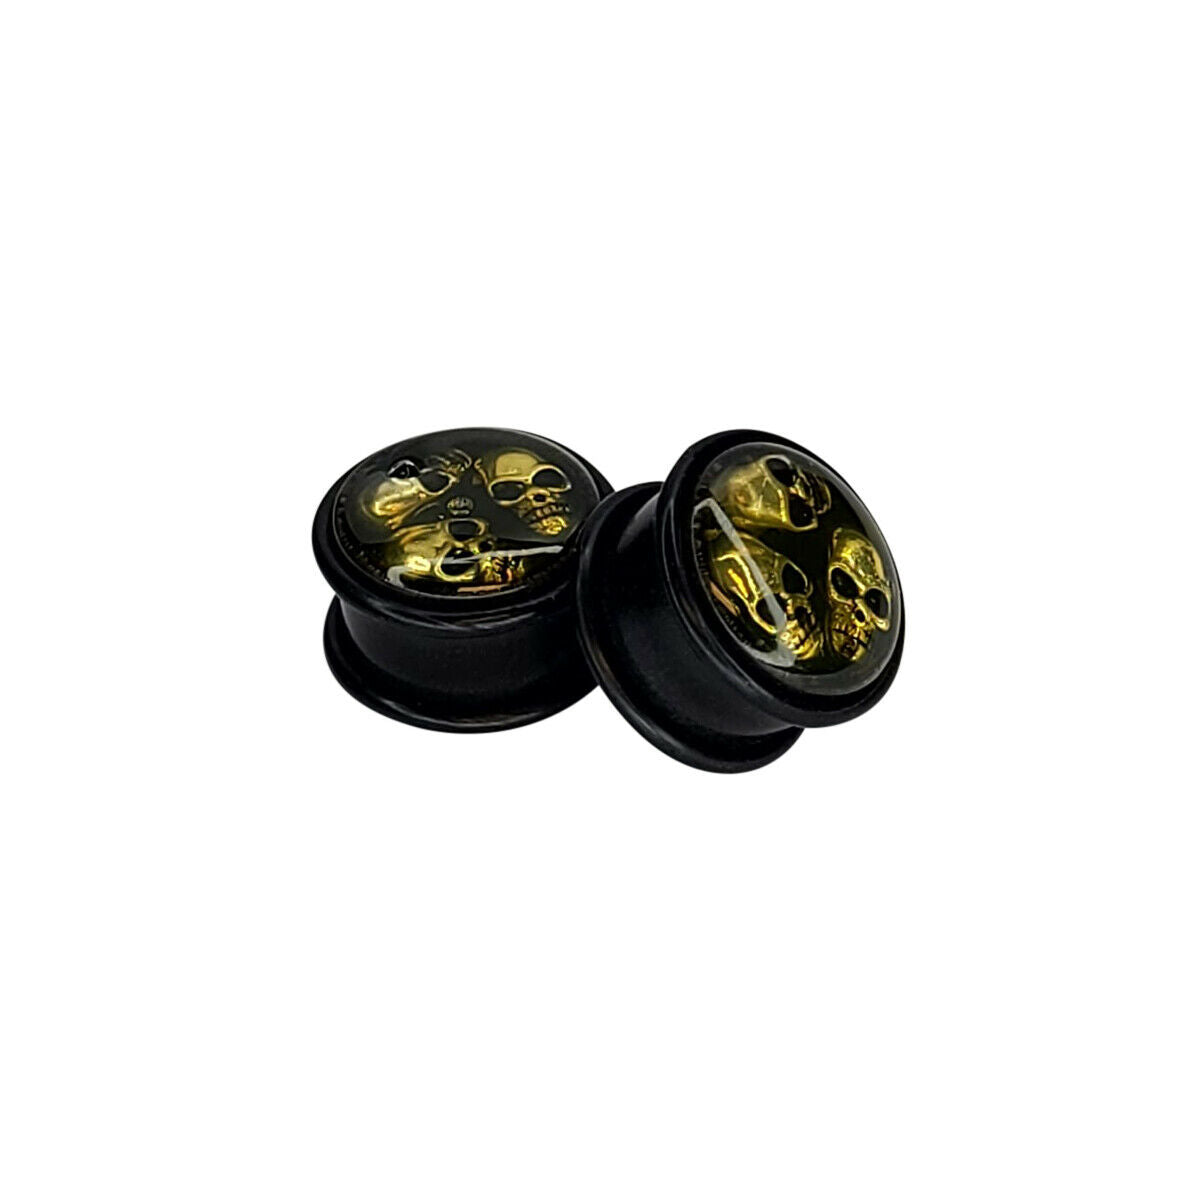 Pair of Acrylic Ear Plugs O-ring Triple Antique Gold Skull Design 16mm 5/8"